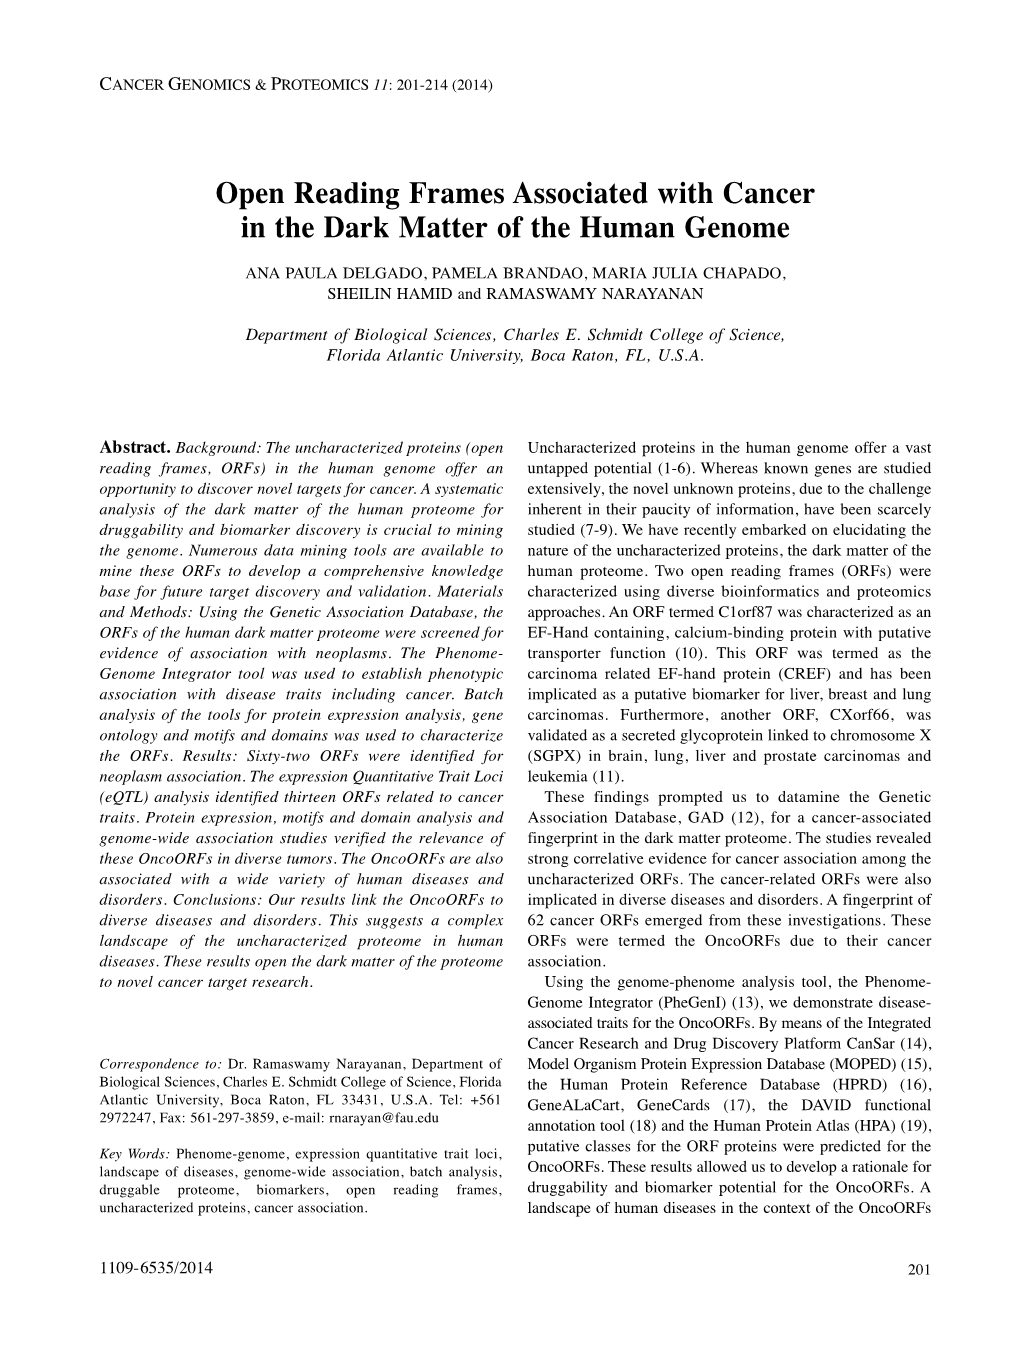 Open Reading Frames Associated with Cancer in the Dark Matter of the Human Genome